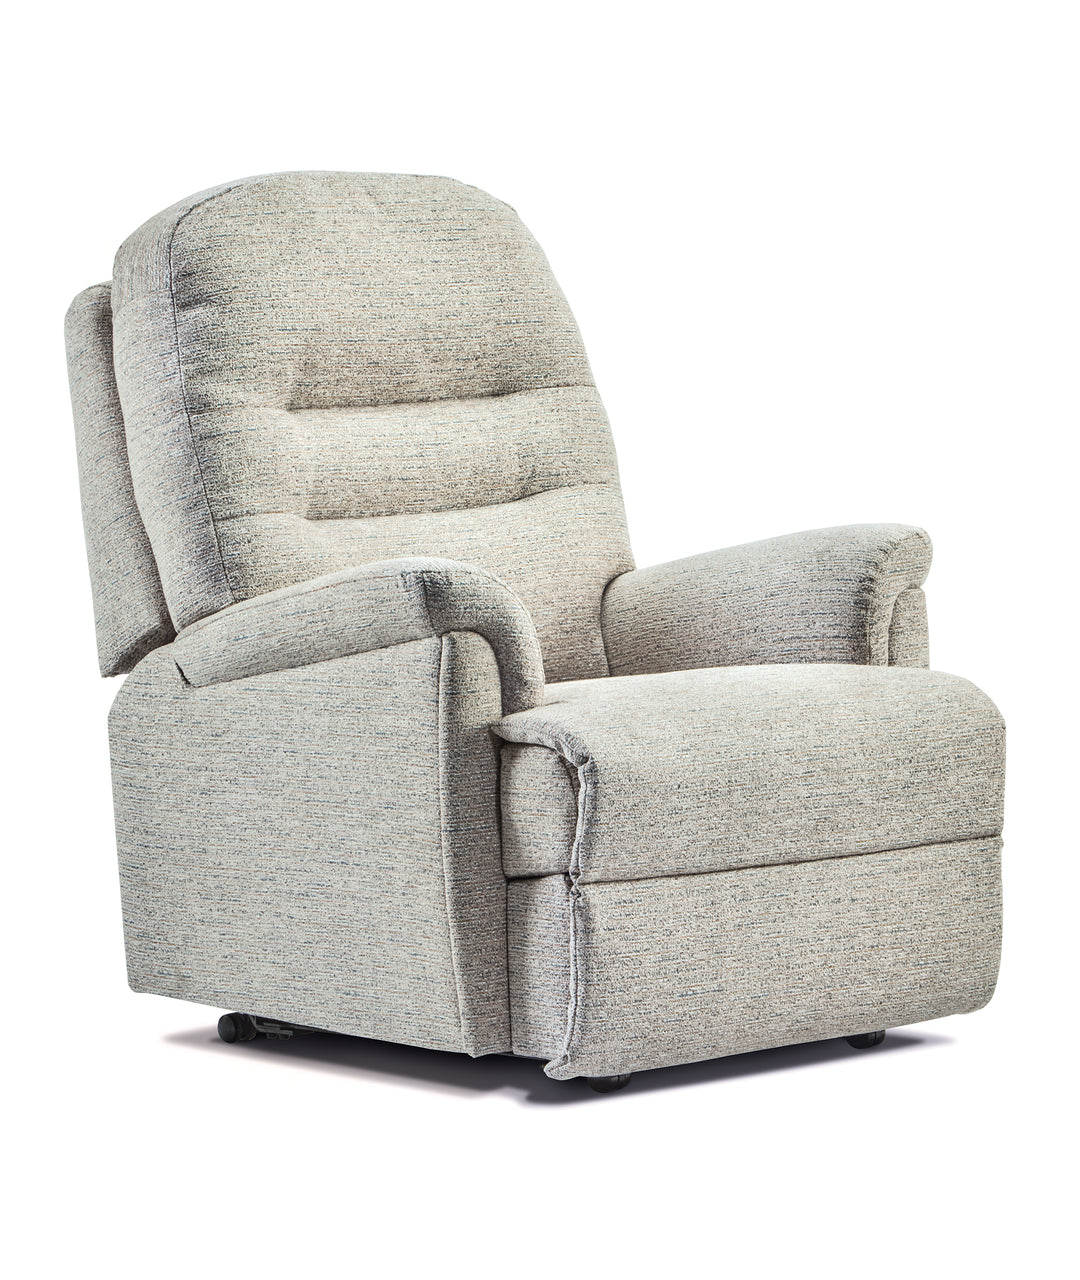 Amberley Recliner Chair Collection